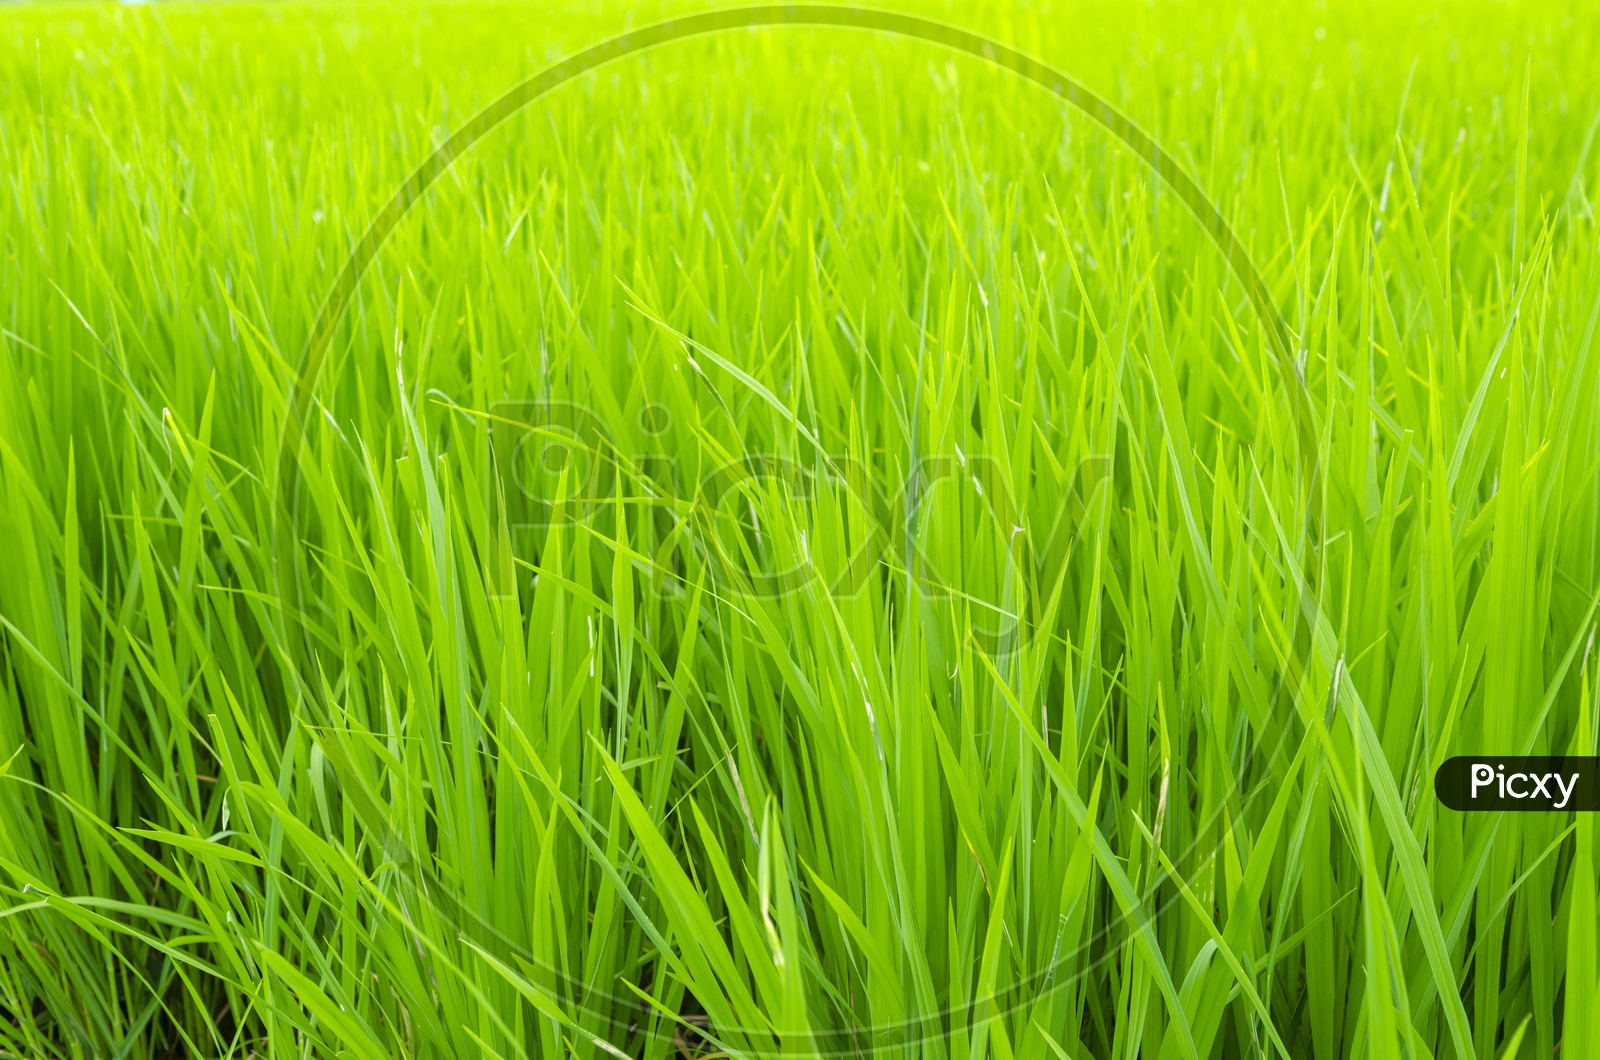 Close up of rice paddy field